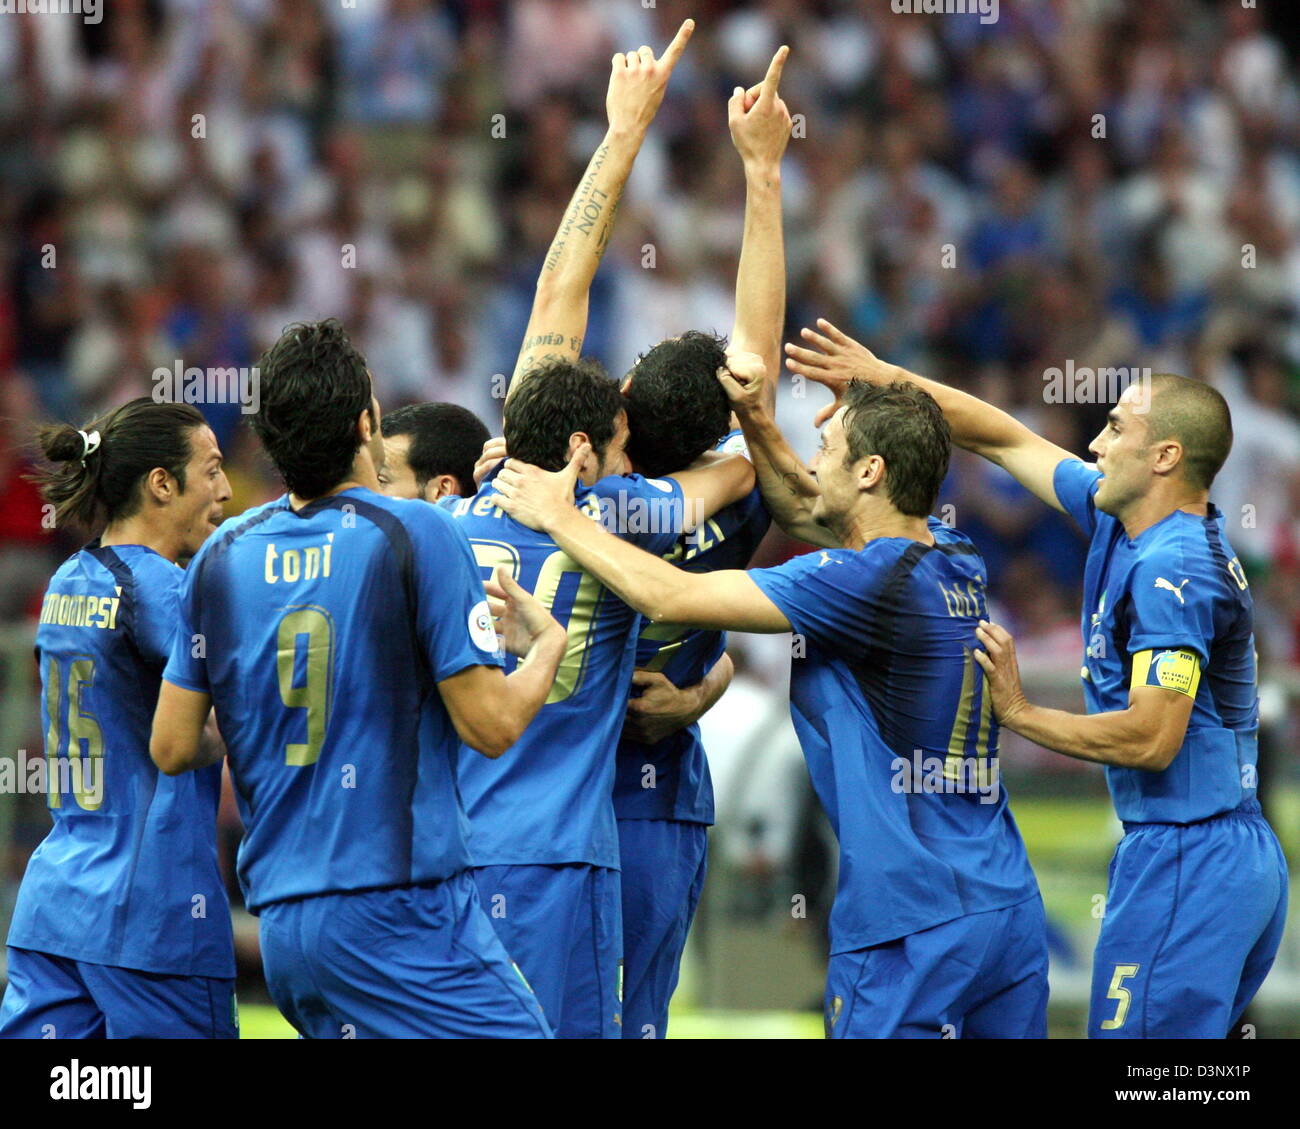 Marco Materazzi (C) from Italy celebrated by teammates after scoring the 1:1 draw during the final match of the 2006 FIFA World Cup Italy vs. France at the Olympic Stadium in Berlin, Germany, Sunday 09 July 2006. Photo: MICHAEL HANSCKE +++ Mobile Services OUT +++ Please refer to FIFA's Terms and Conditions Stock Photo